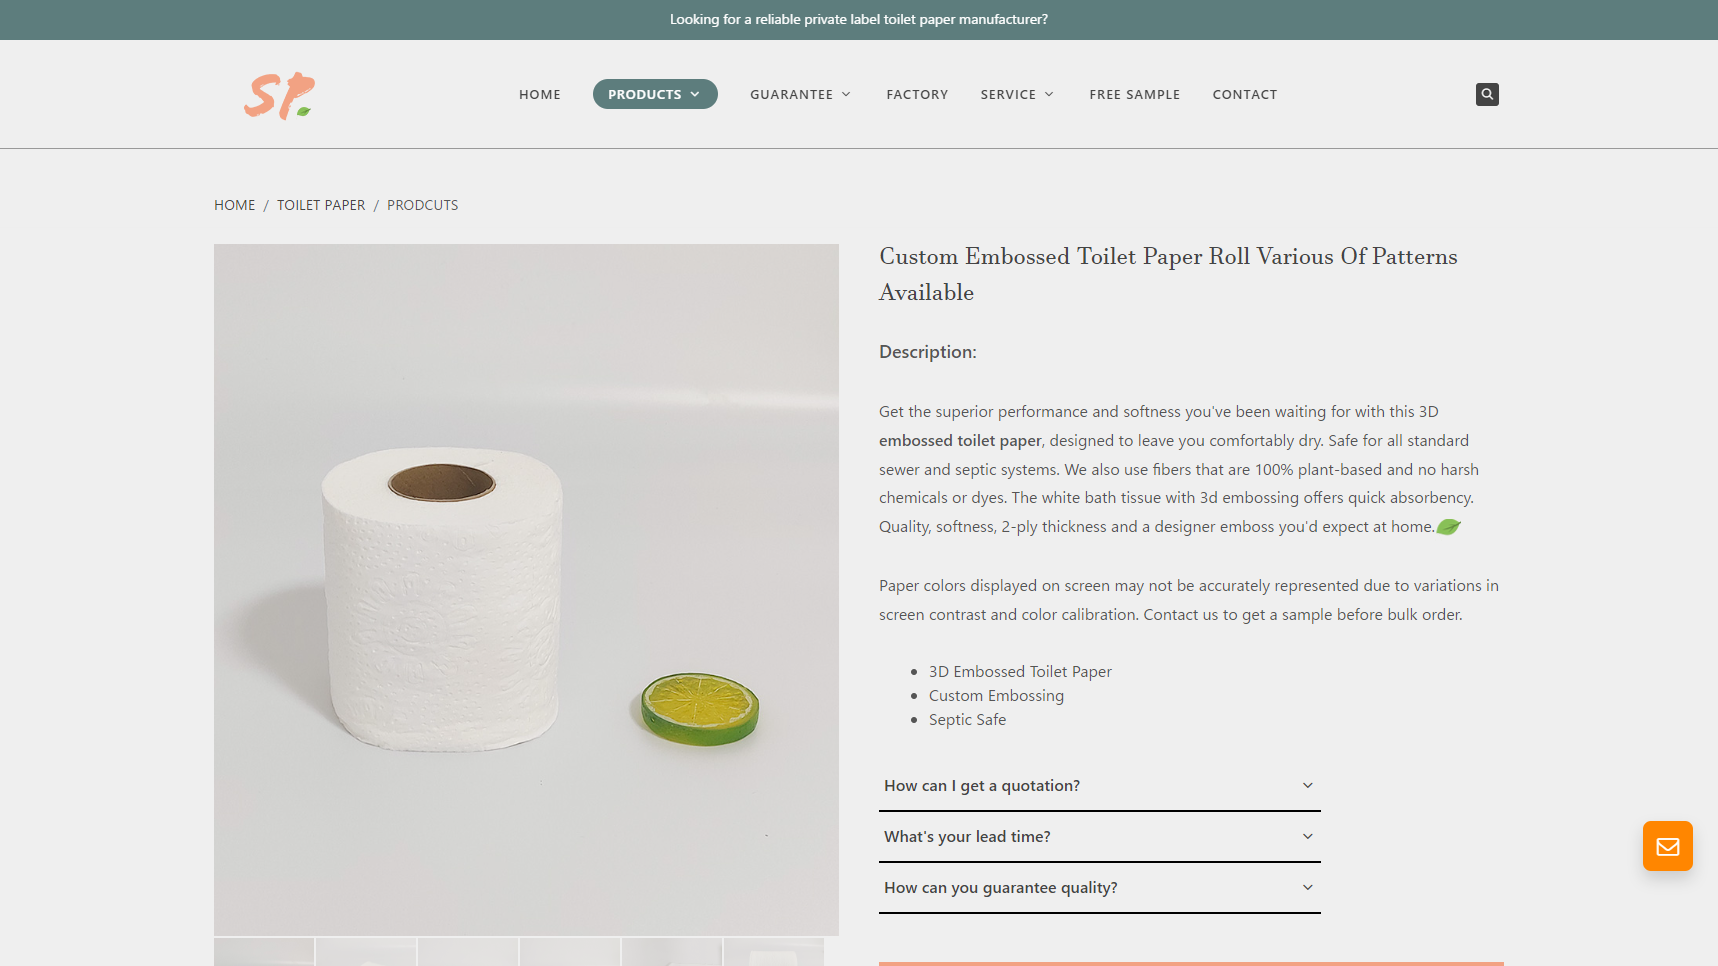 Softer Paper - Toilet Pape Manufacturer